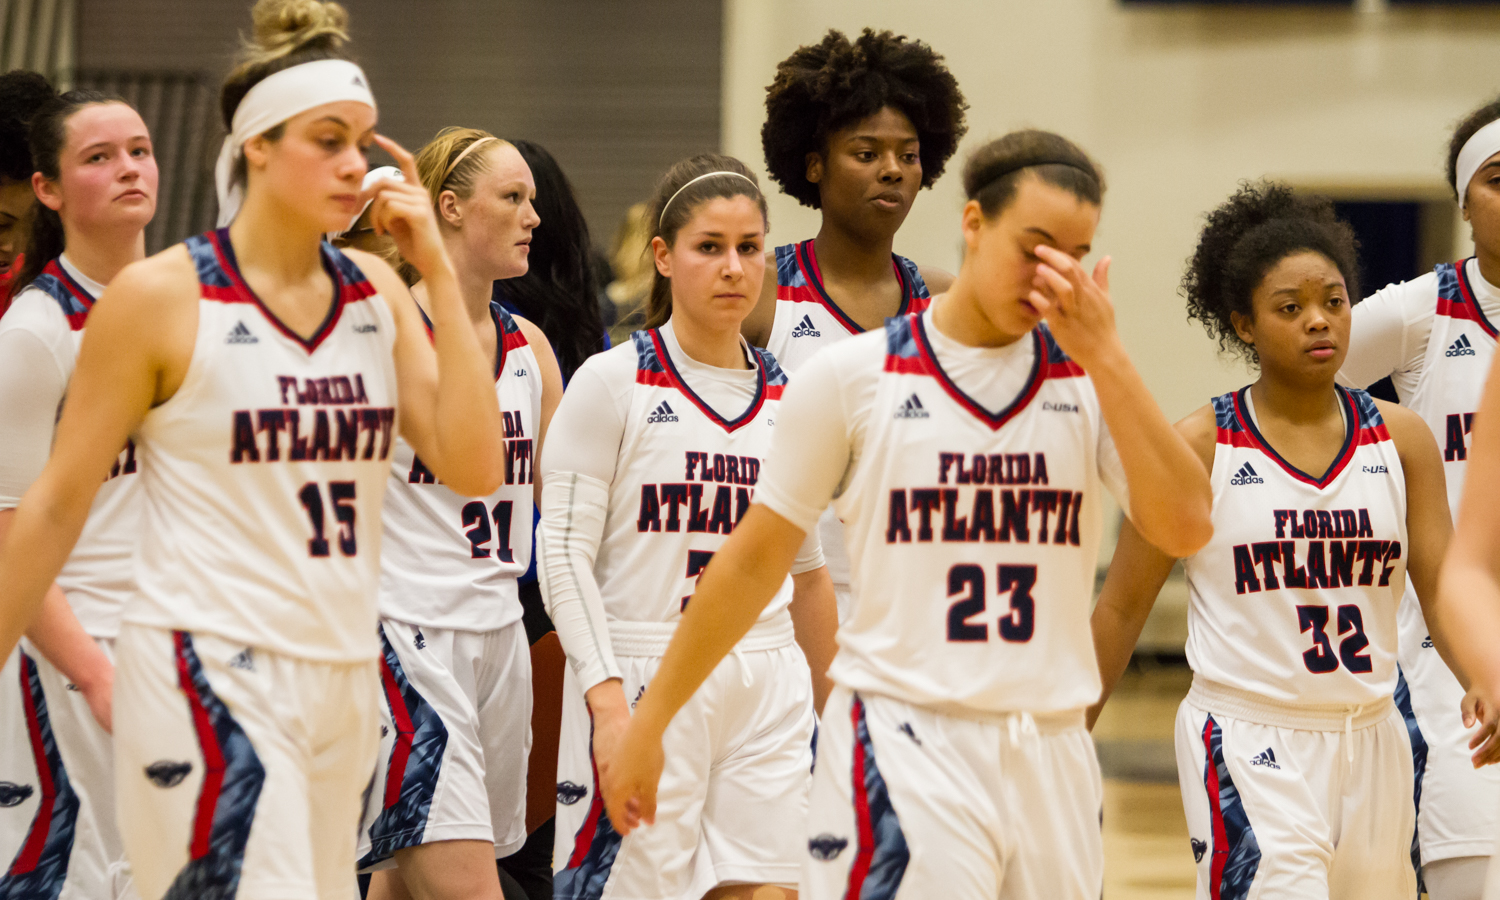 Women's basketball: FAU's losing streak hits 11 after loss to Old